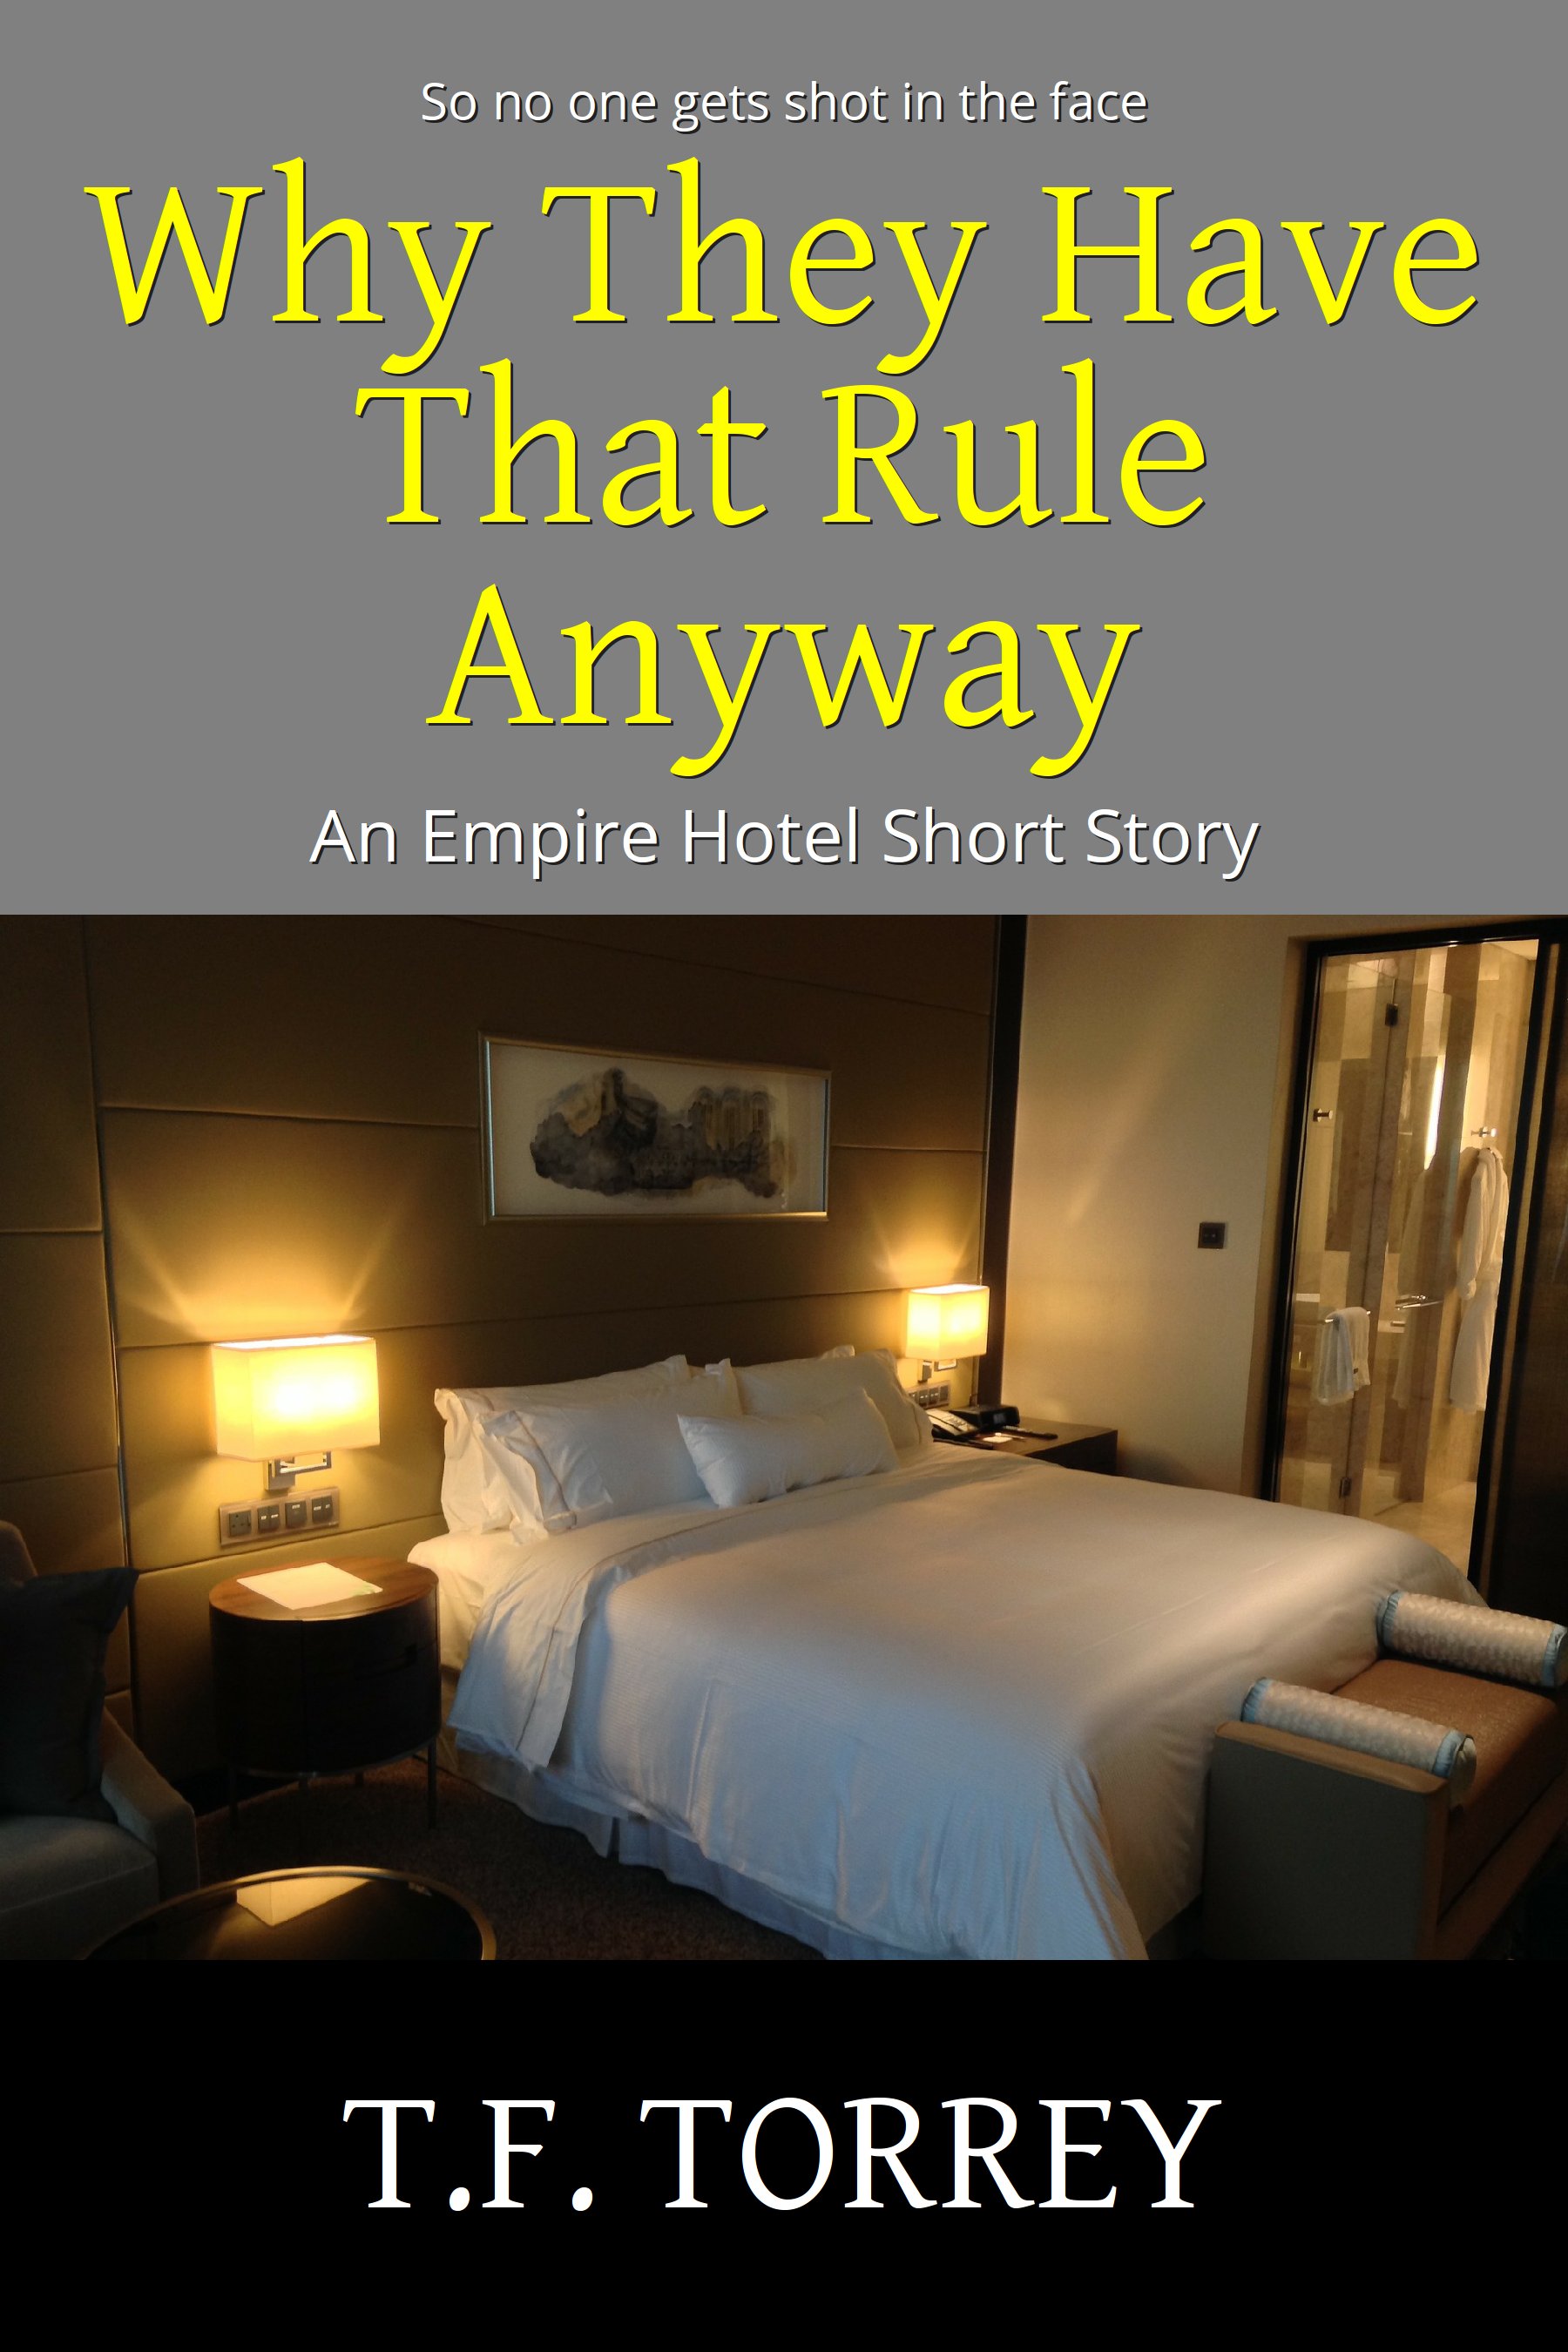 Cover of Why They Have That Rule Anyway: An Empire Hotel Short Story by T.F. Torrey